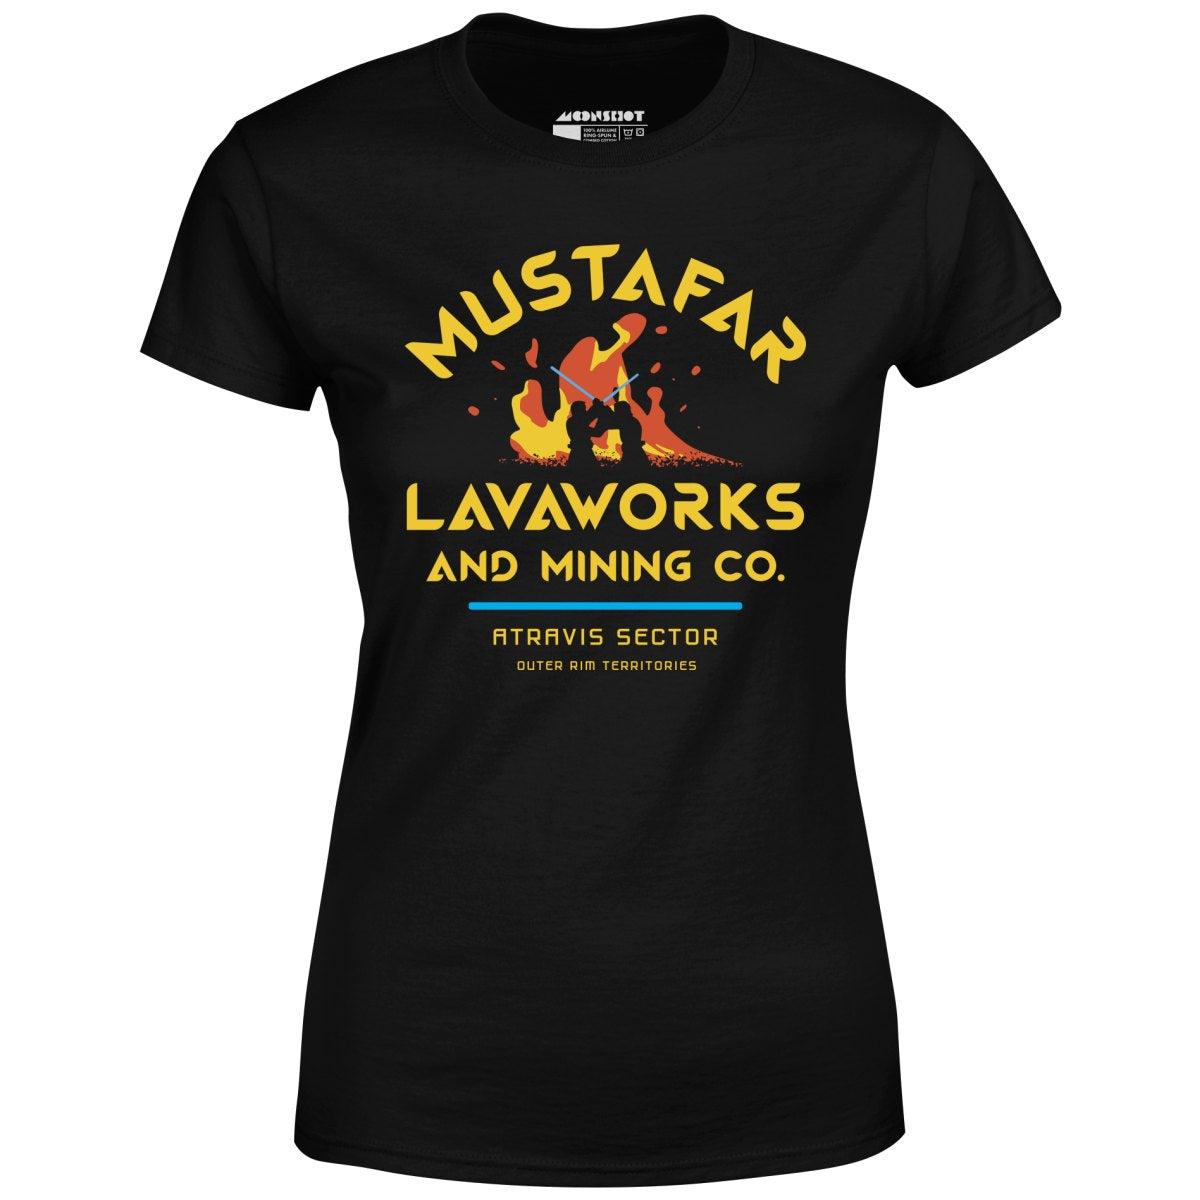 Mustafar Lavaworks and Mining Co - Women's T-Shirt